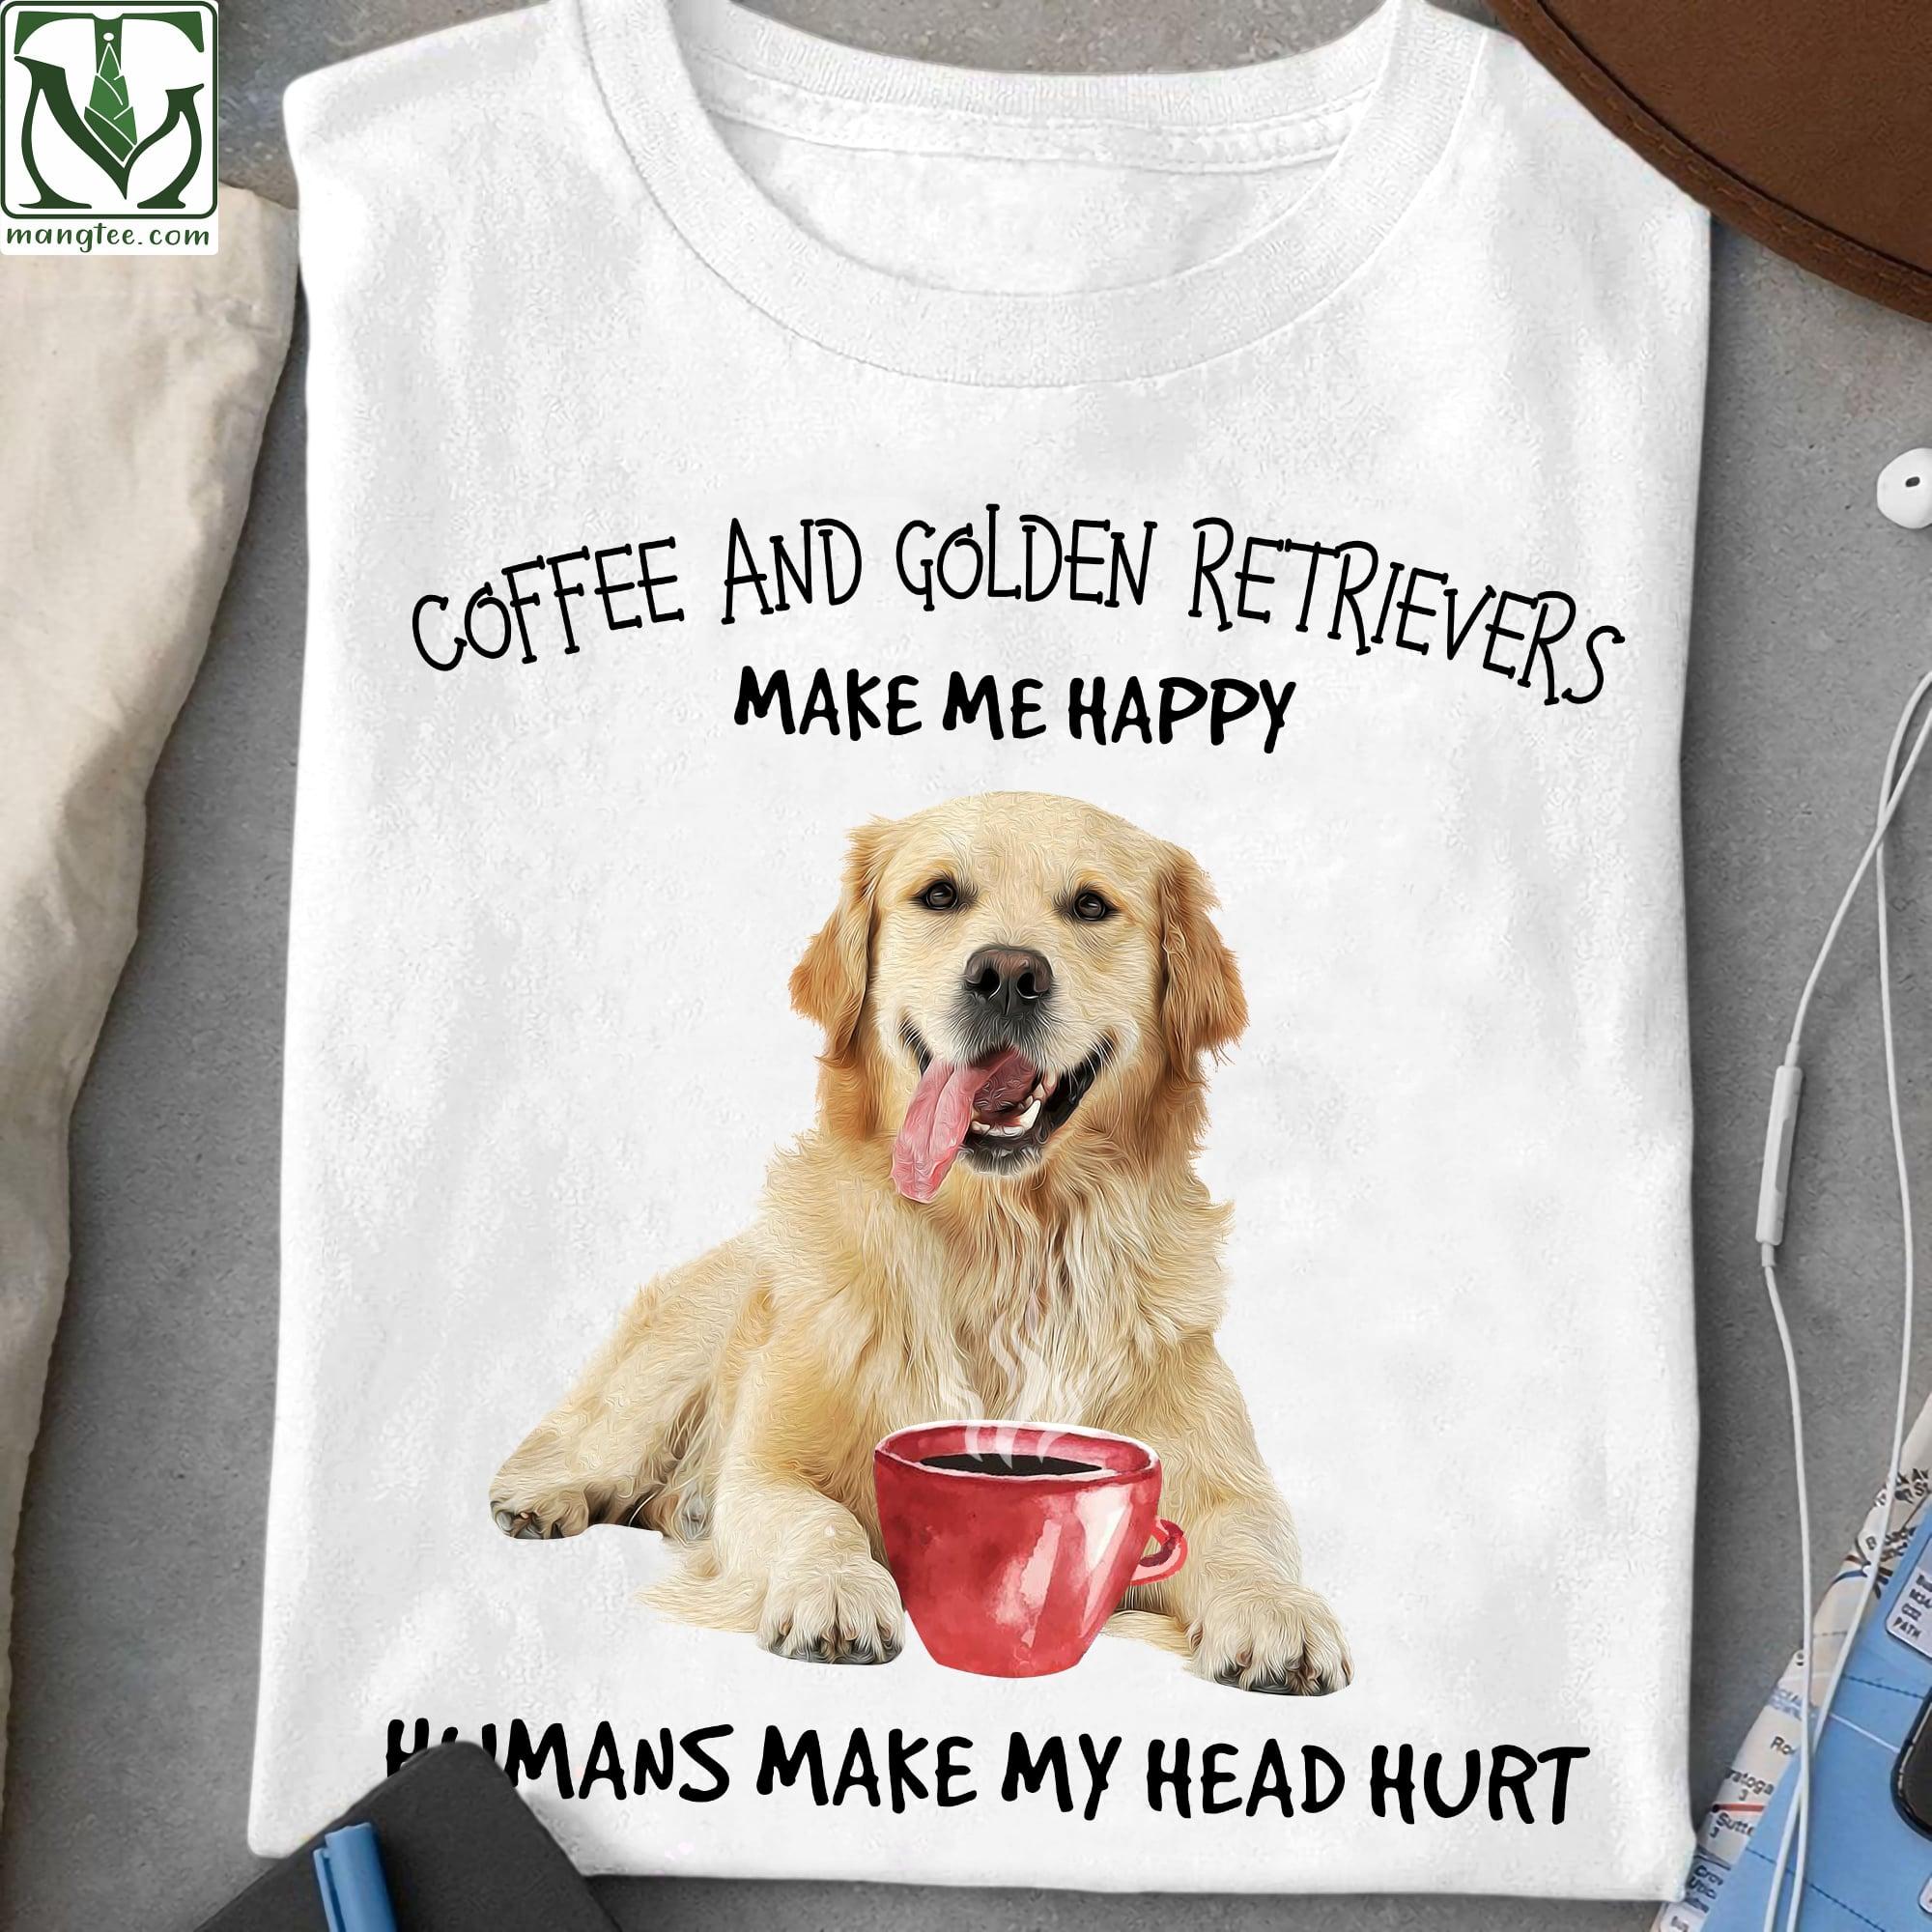 Coffee and golden retrievers make me happy, humans make my head hurt - Gift for golden owners